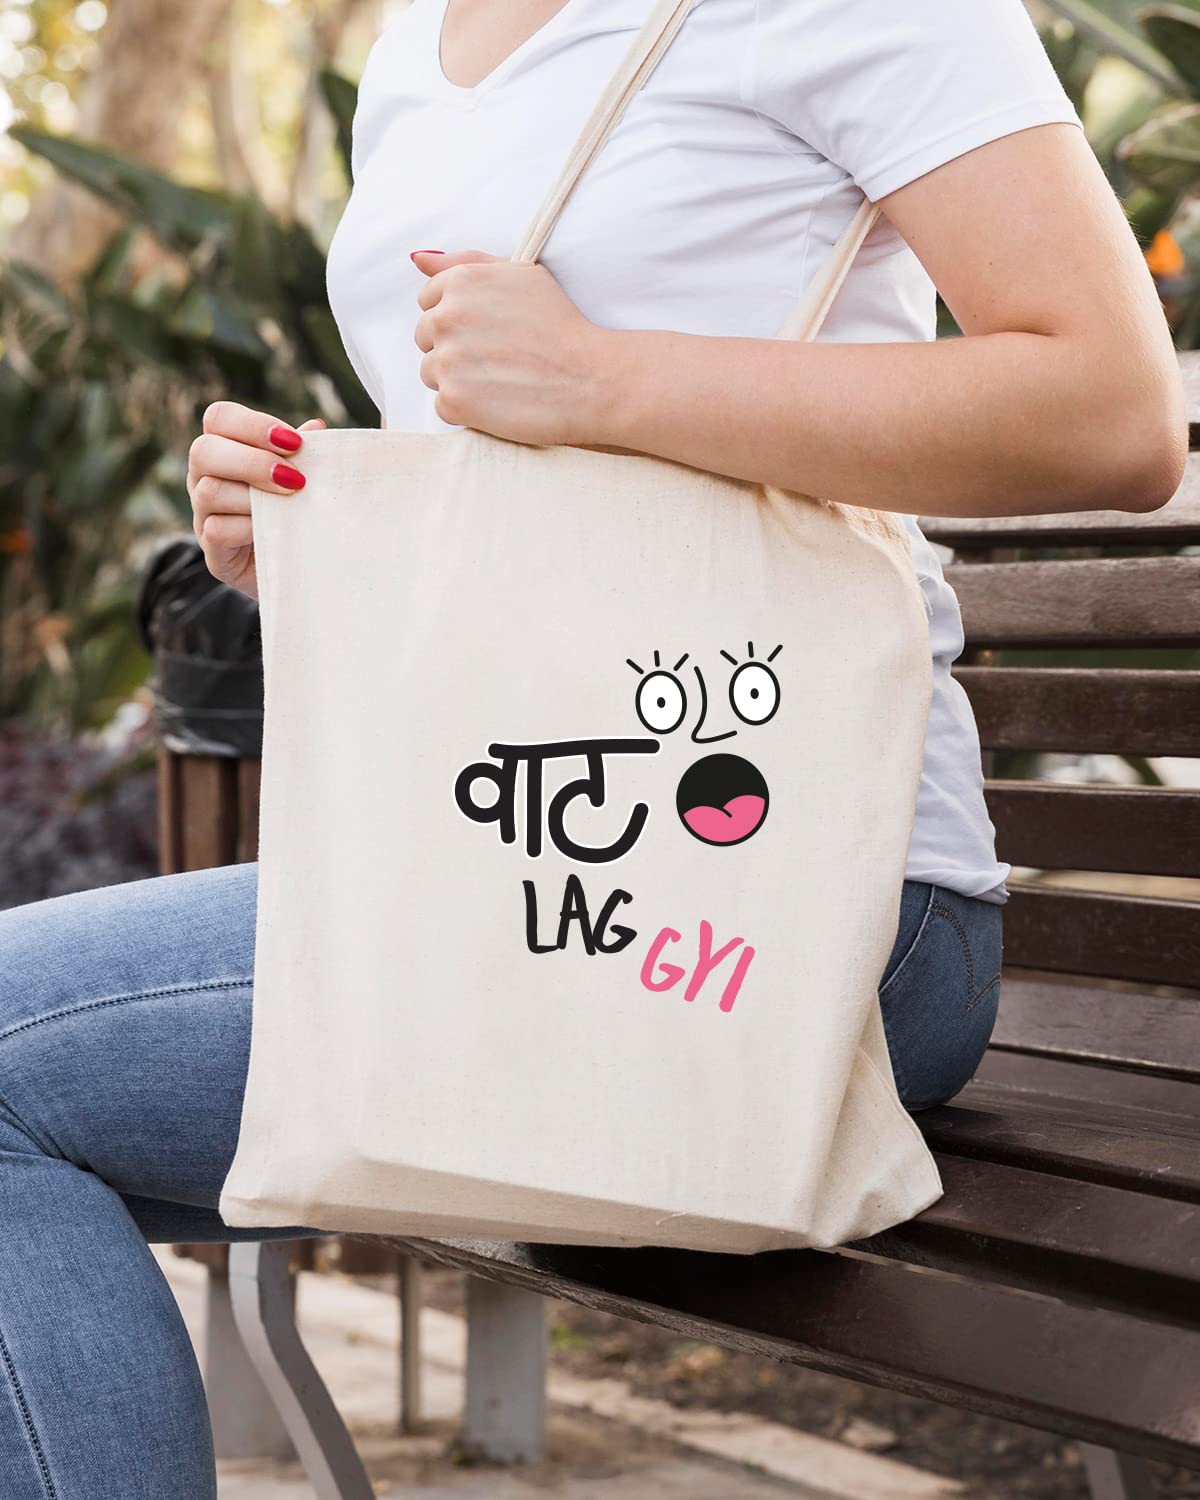 The Pink Magnet Vaat Lag Gyi Tote Bag - Canvas Tote Bag for Women | Printed Multipurpose Cotton Bags | Cute Hand Bag for Girls | Best for College, Travel, Grocery | Reusable Shopping Bag | Eco-Friendly Tote Bag